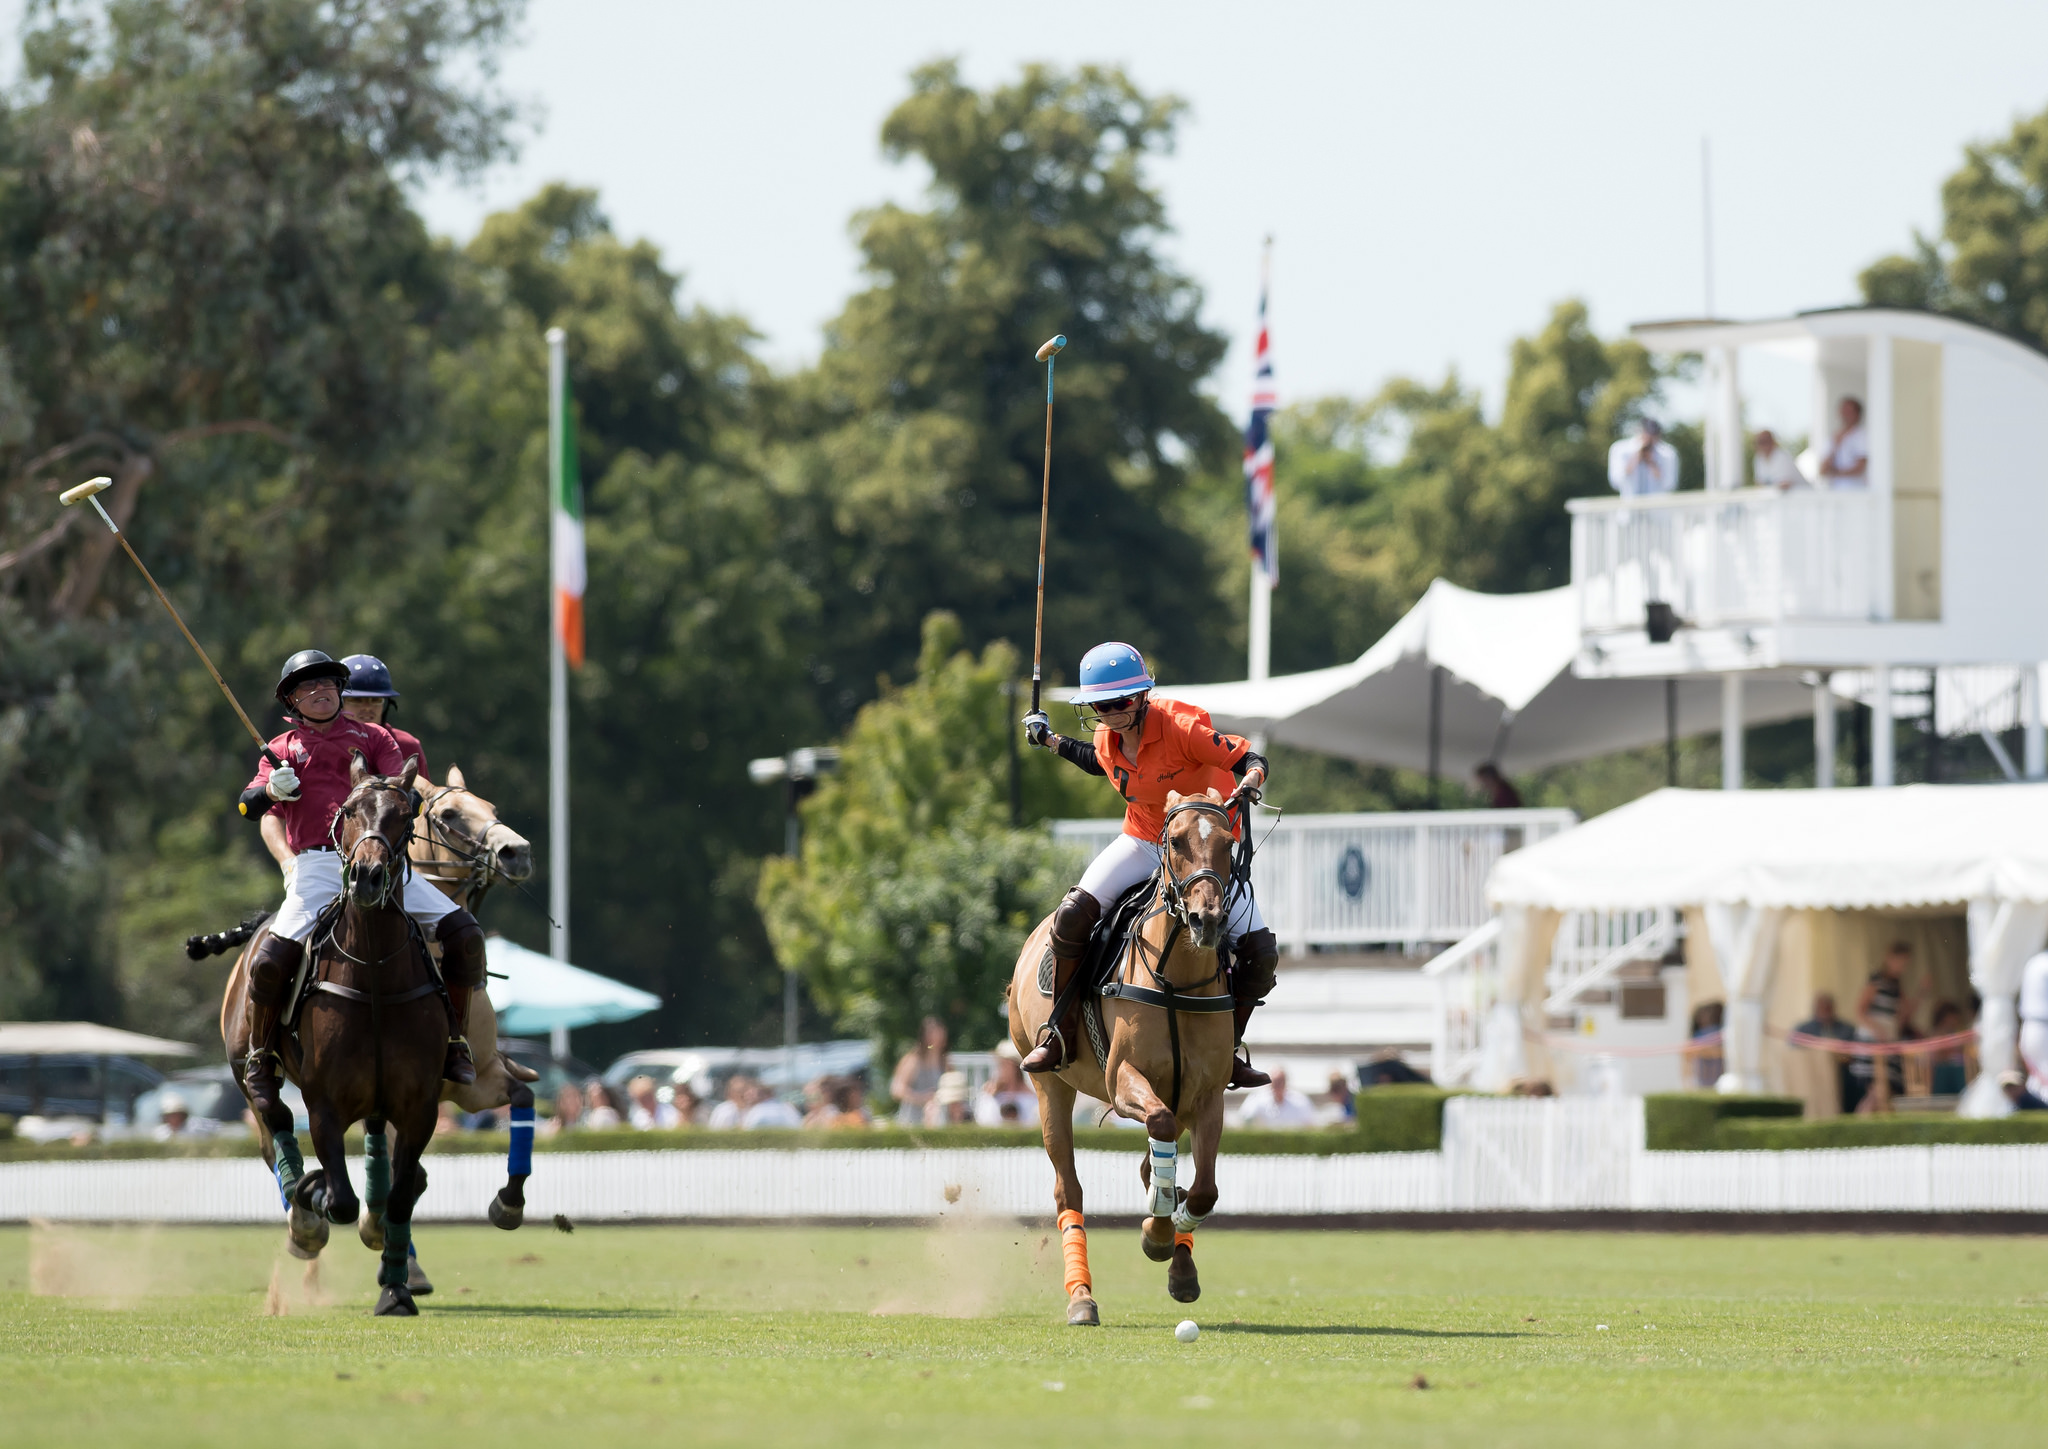 the polo match london,OFF